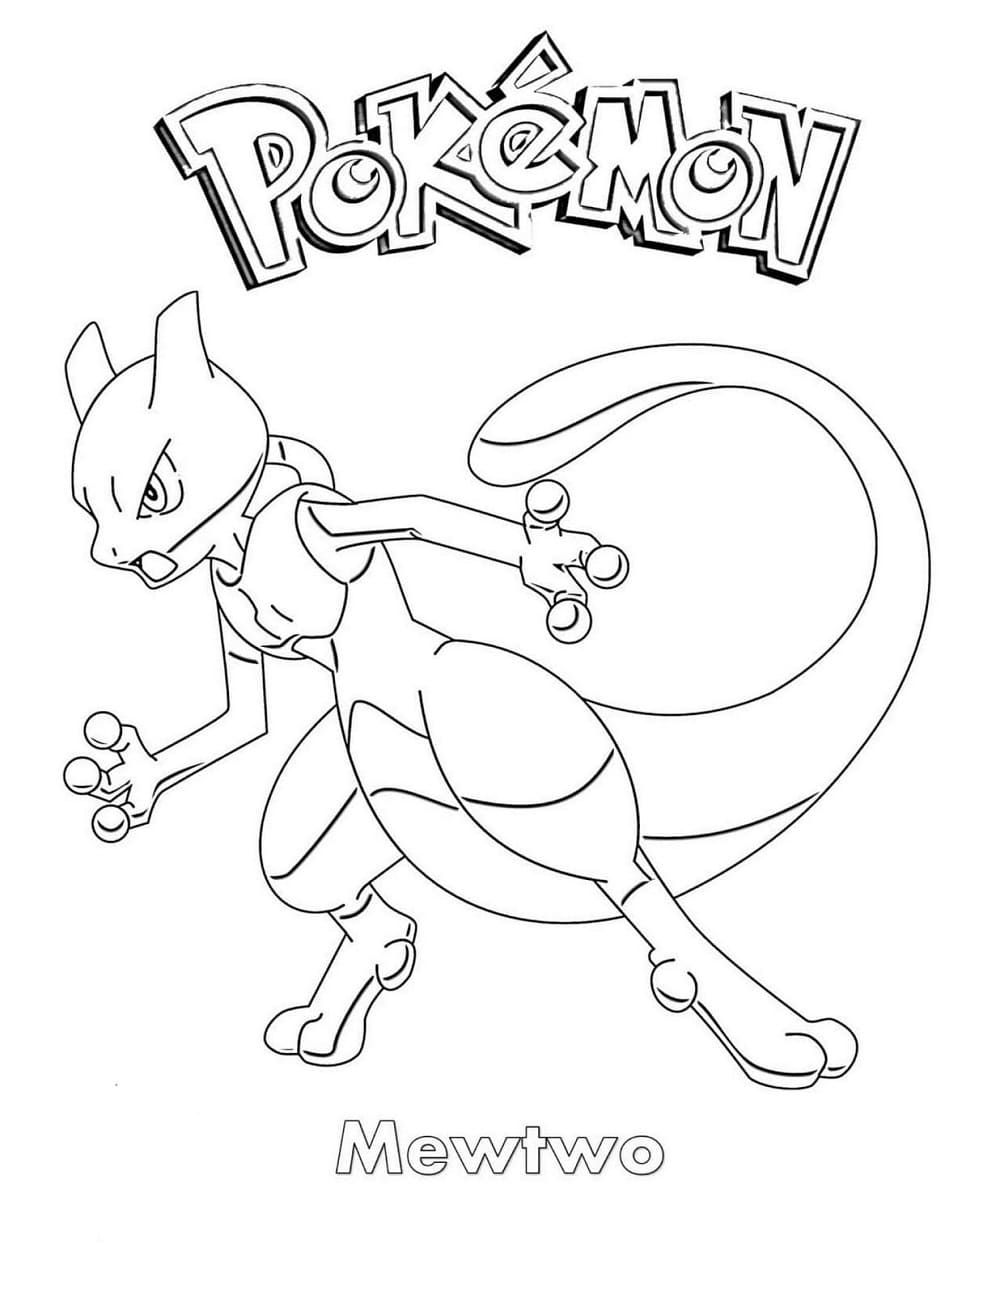 Printable Free Mewtwo Image Coloring Page